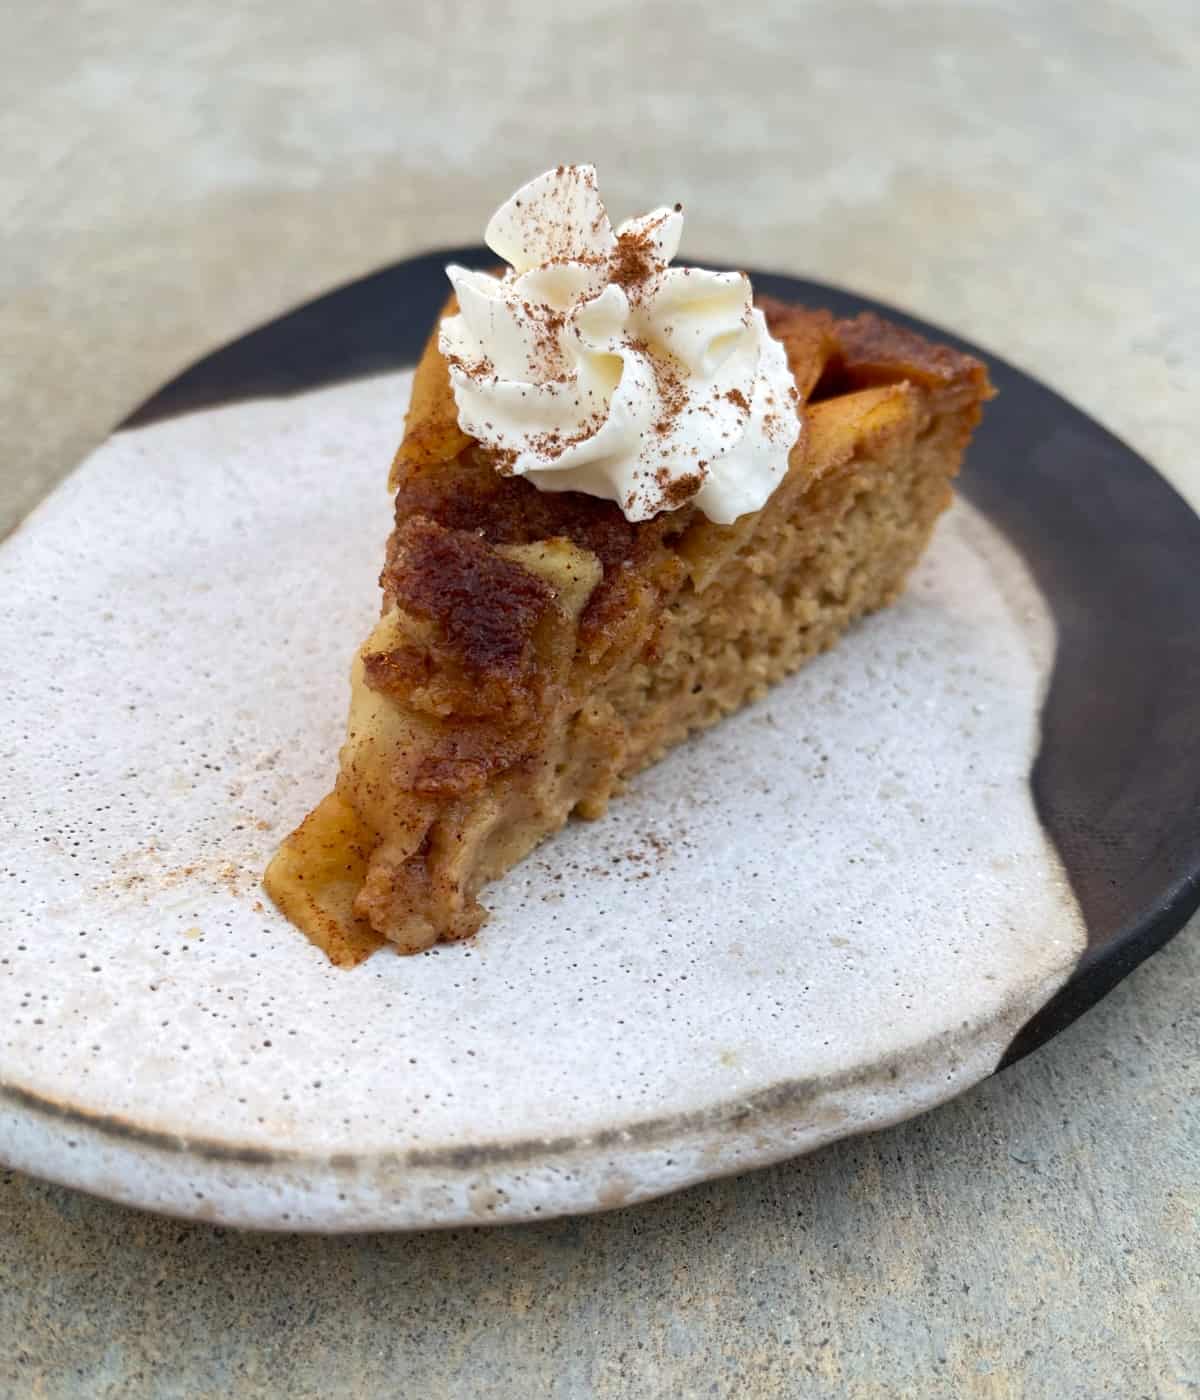 Slice of cinnamon apple quick cake garnished with whipped topping and sprinkle of cinnamon on ceramic plate.